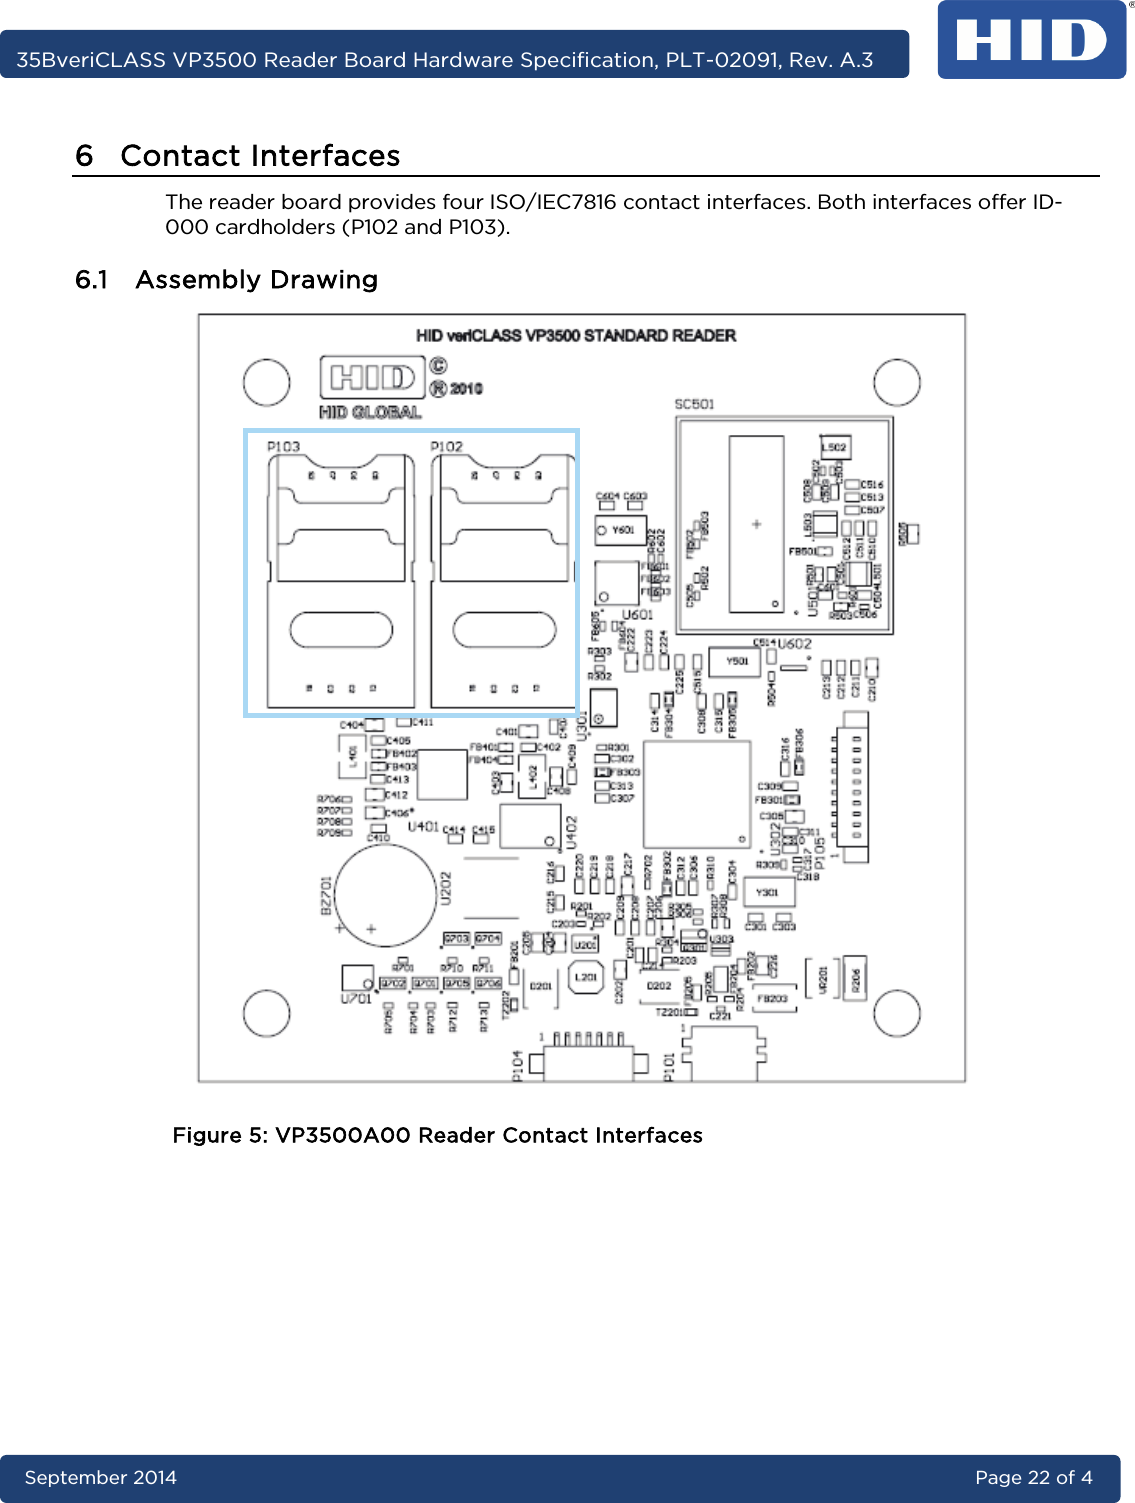     35BveriCLASS VP3500 Reader Board Hardware Specification, PLT-02091, Rev. A.3 September 2014 Page 22 of 4  6 Contact Interfaces The reader board provides four ISO/IEC7816 contact interfaces. Both interfaces offer ID-000 cardholders (P102 and P103). 6.1 Assembly Drawing  Figure 5: VP3500A00 Reader Contact Interfaces     